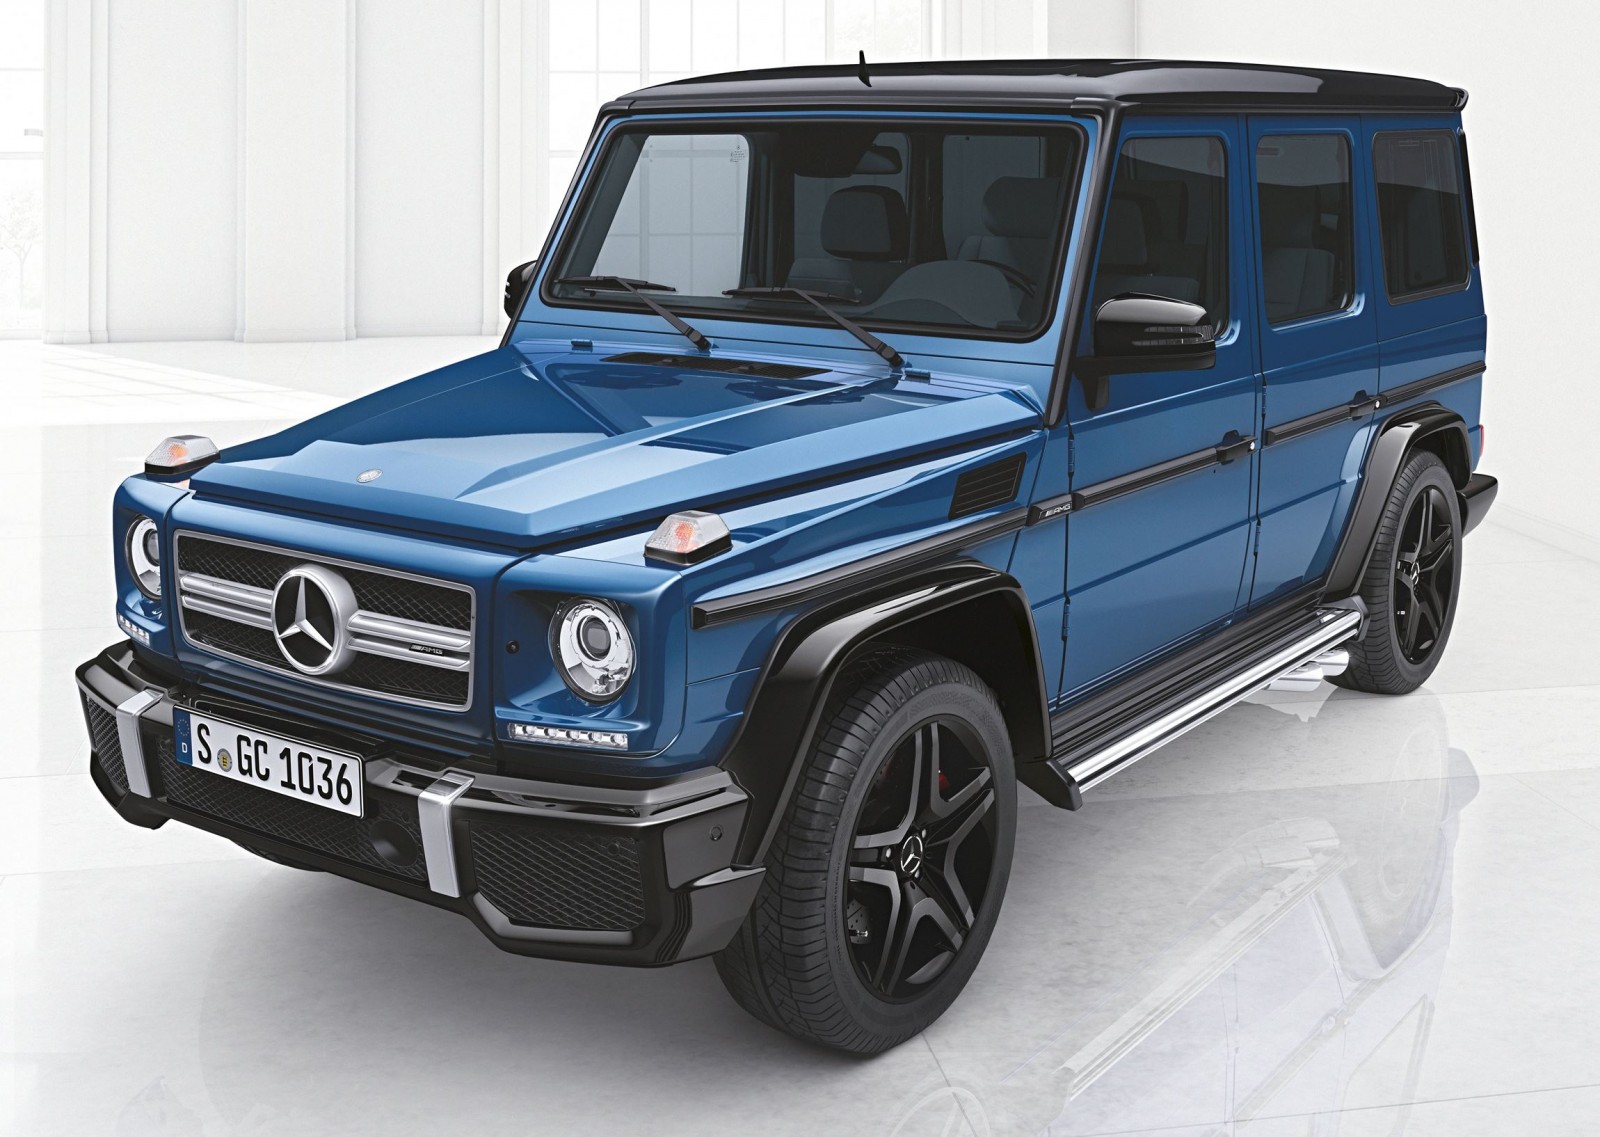 16 G Class Adds New Colors Black Packs And Designo Cabin We Rename The Colors V Offensively Car Revs Daily Com